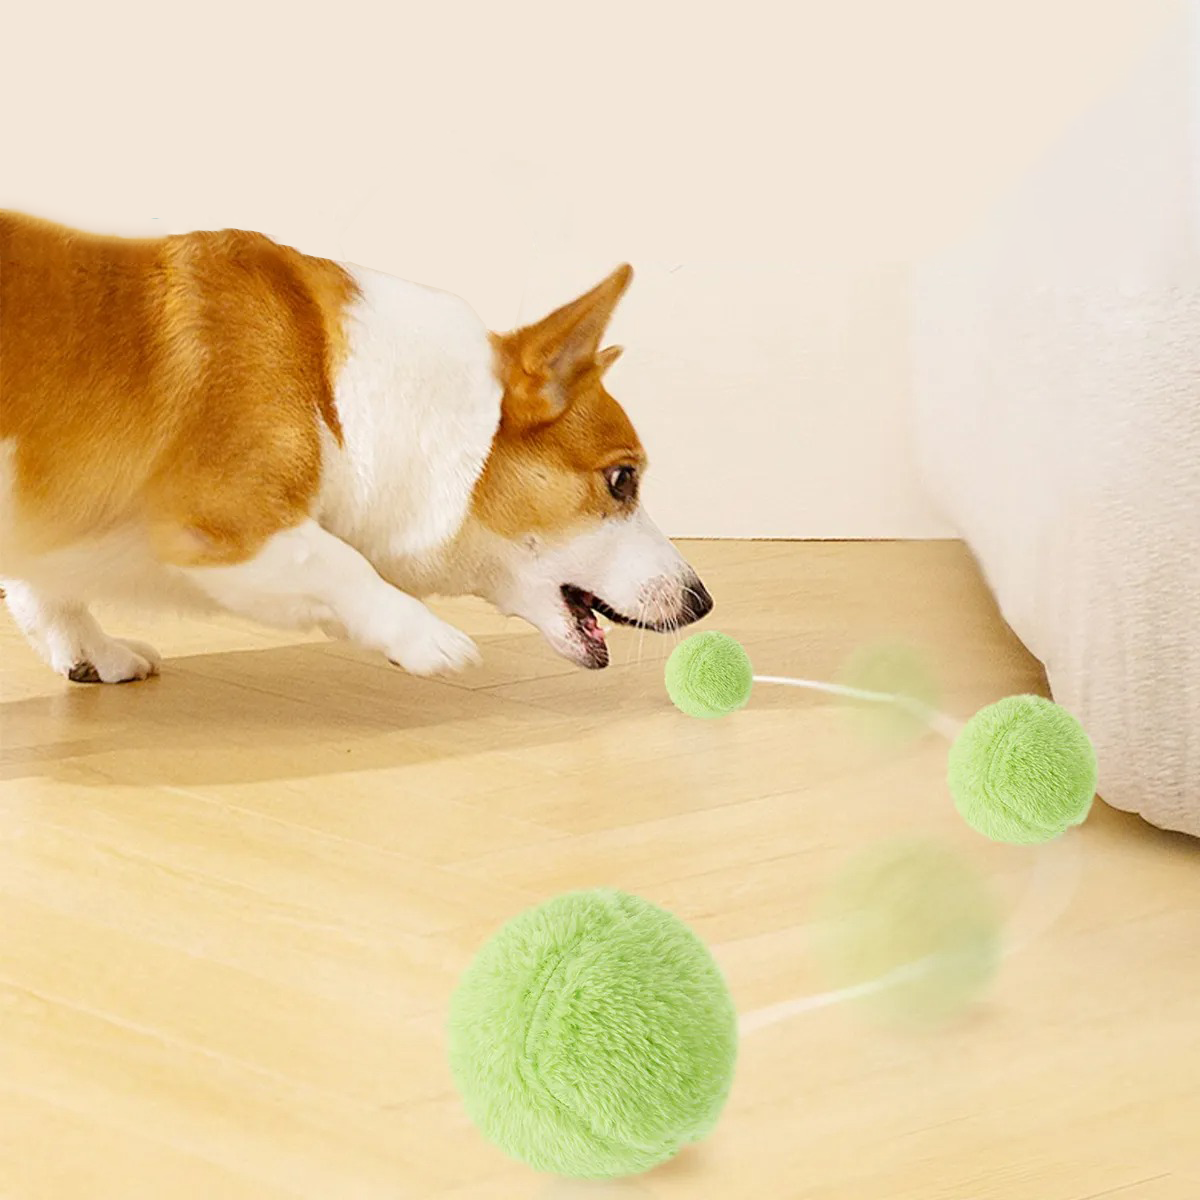 Fluffy Smart Self-Moving Active Dog Ball Toy